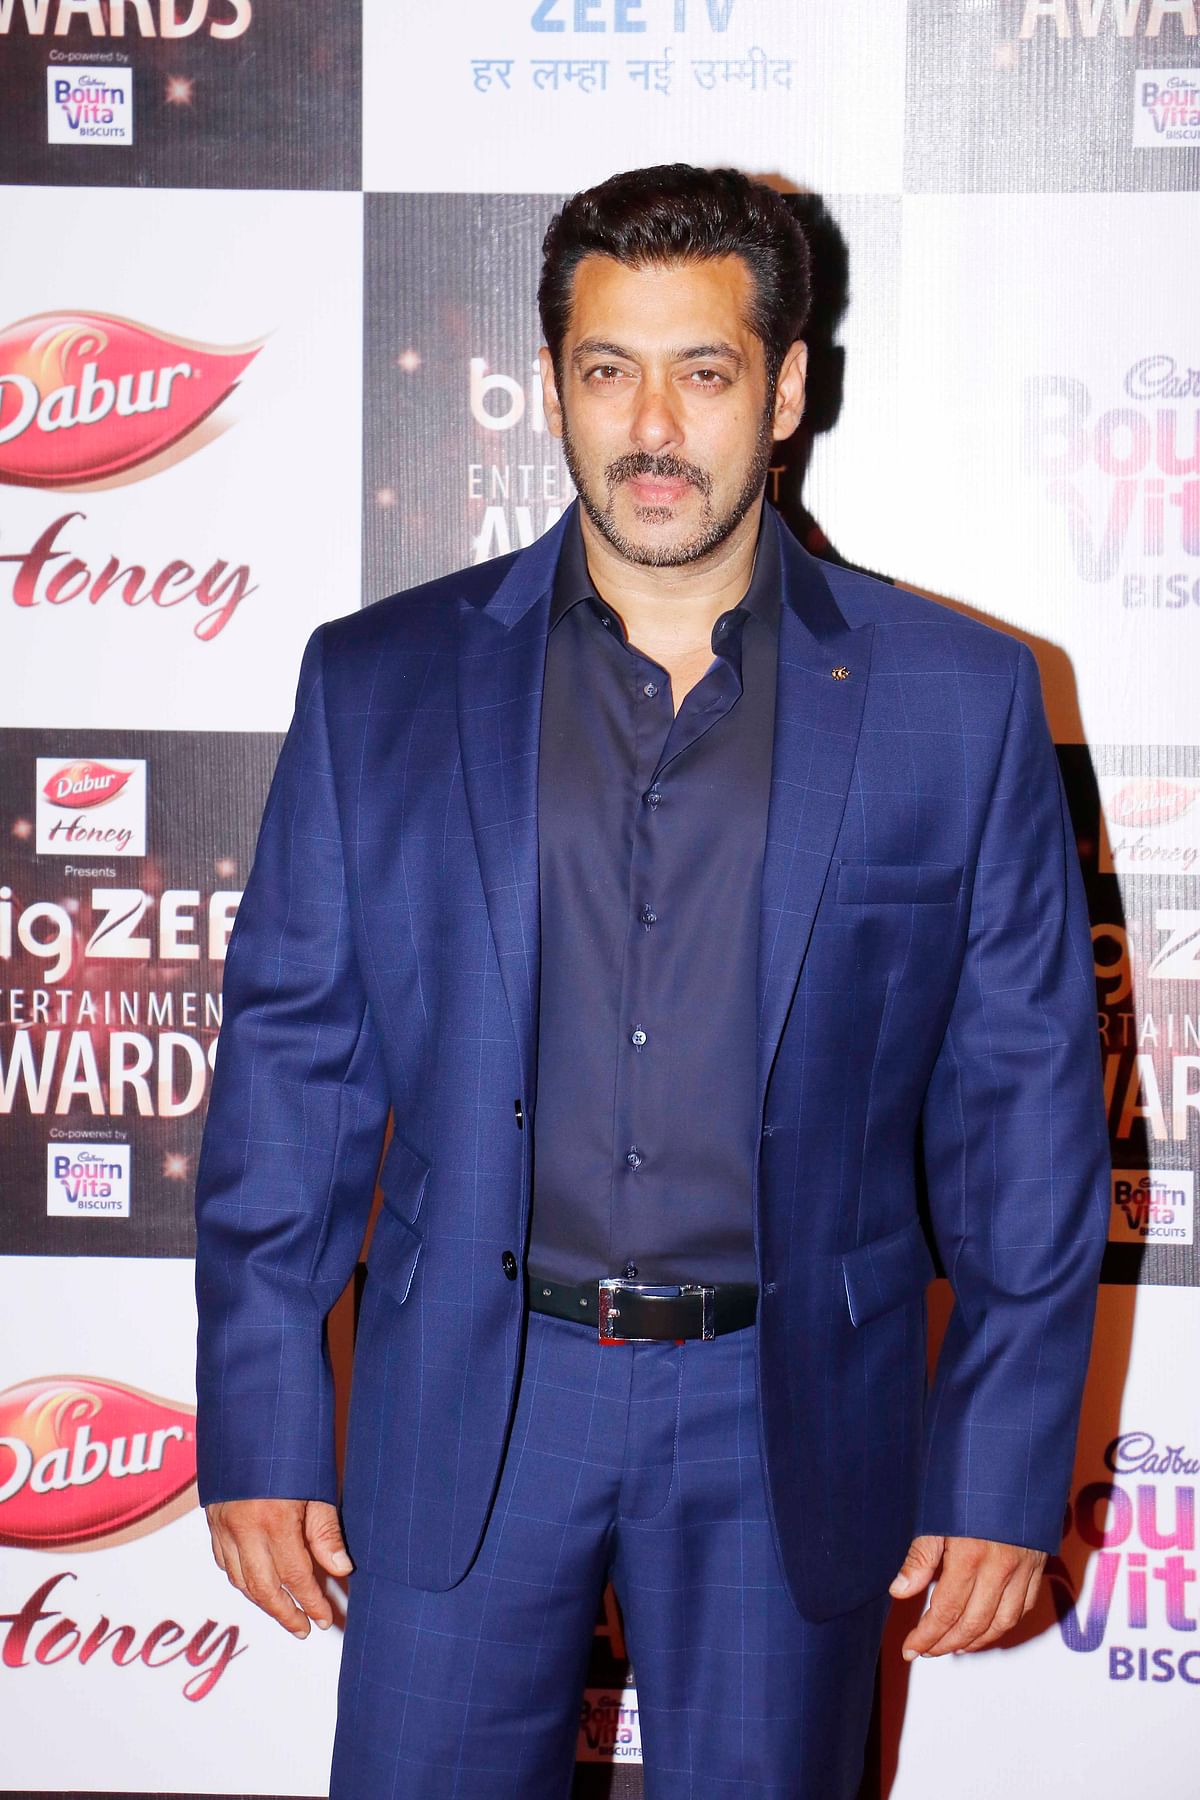 Pics of stars at the Big Zee Entertainment Awards.